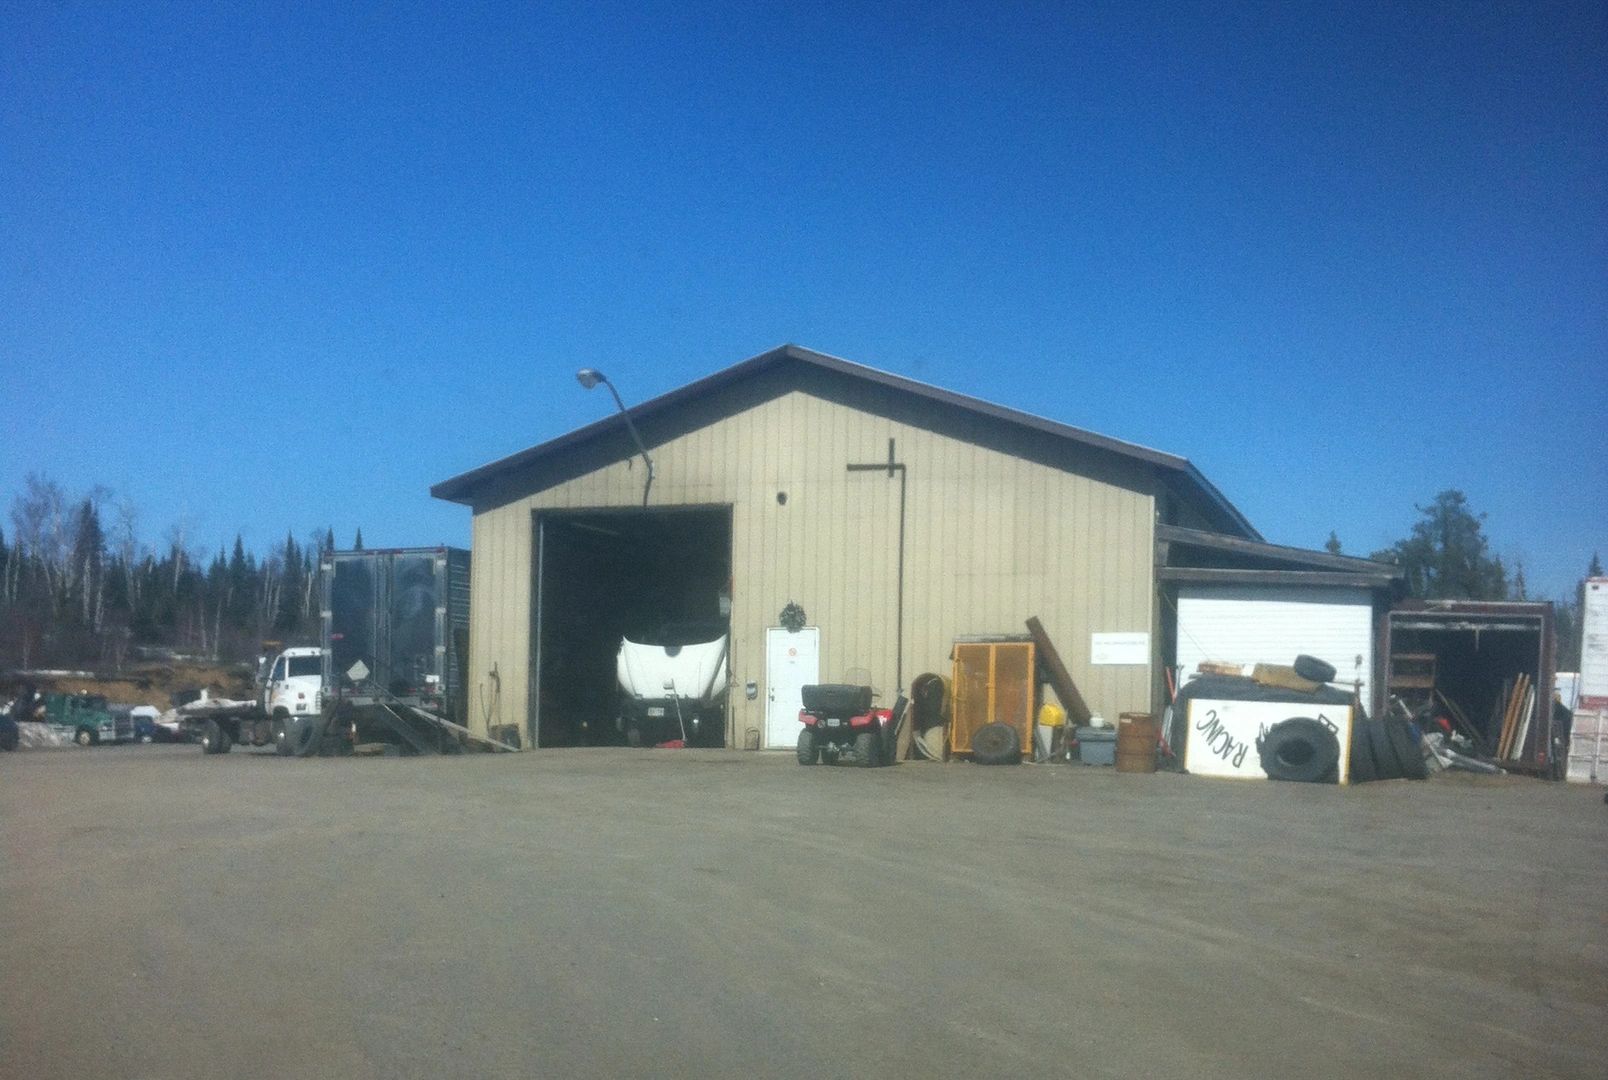 Our 40 by 80 shop where your truck can get serviced or fixed. Lots of room  to turn around out back.